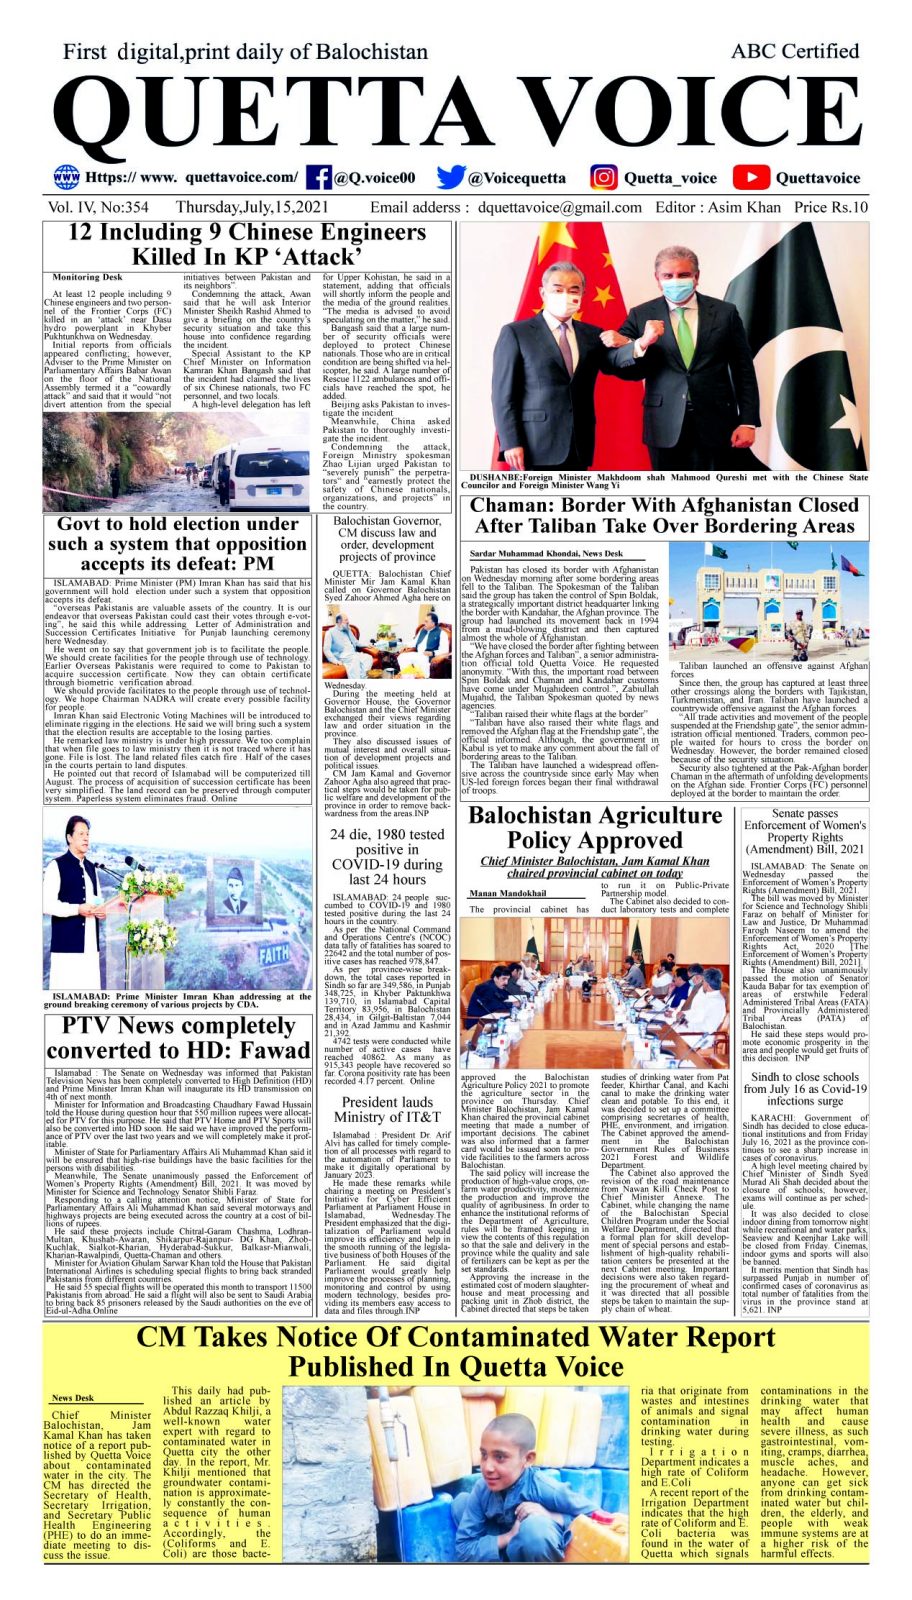 Today's Quetta Voice, Thursday, July 15, 2021